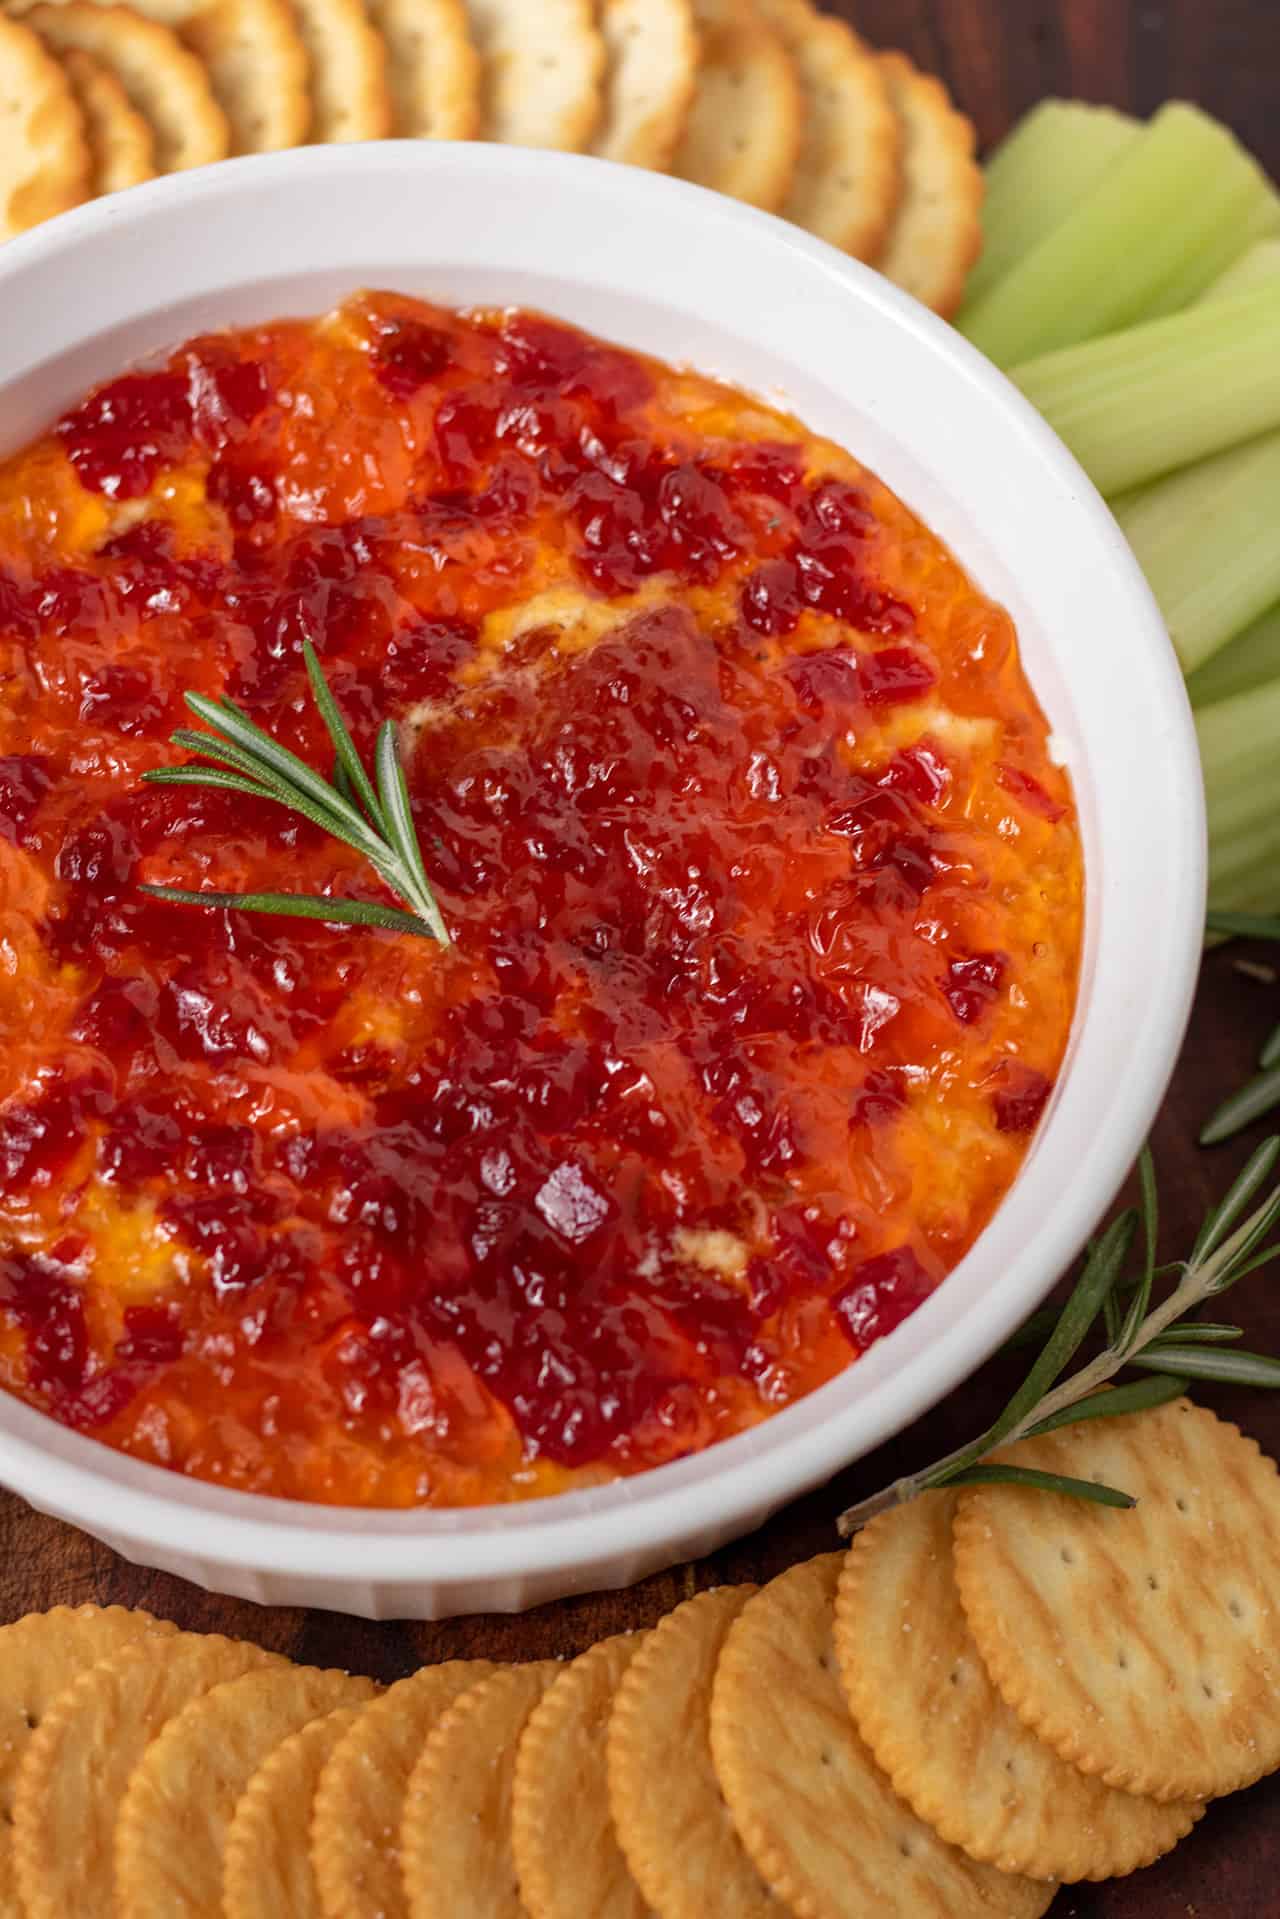 A round white serving bowl filled with cream cheese and pepper jelly dip. There's a sprig of fresh rosemary on top. You can see celery sticks and crackers next to the dip.